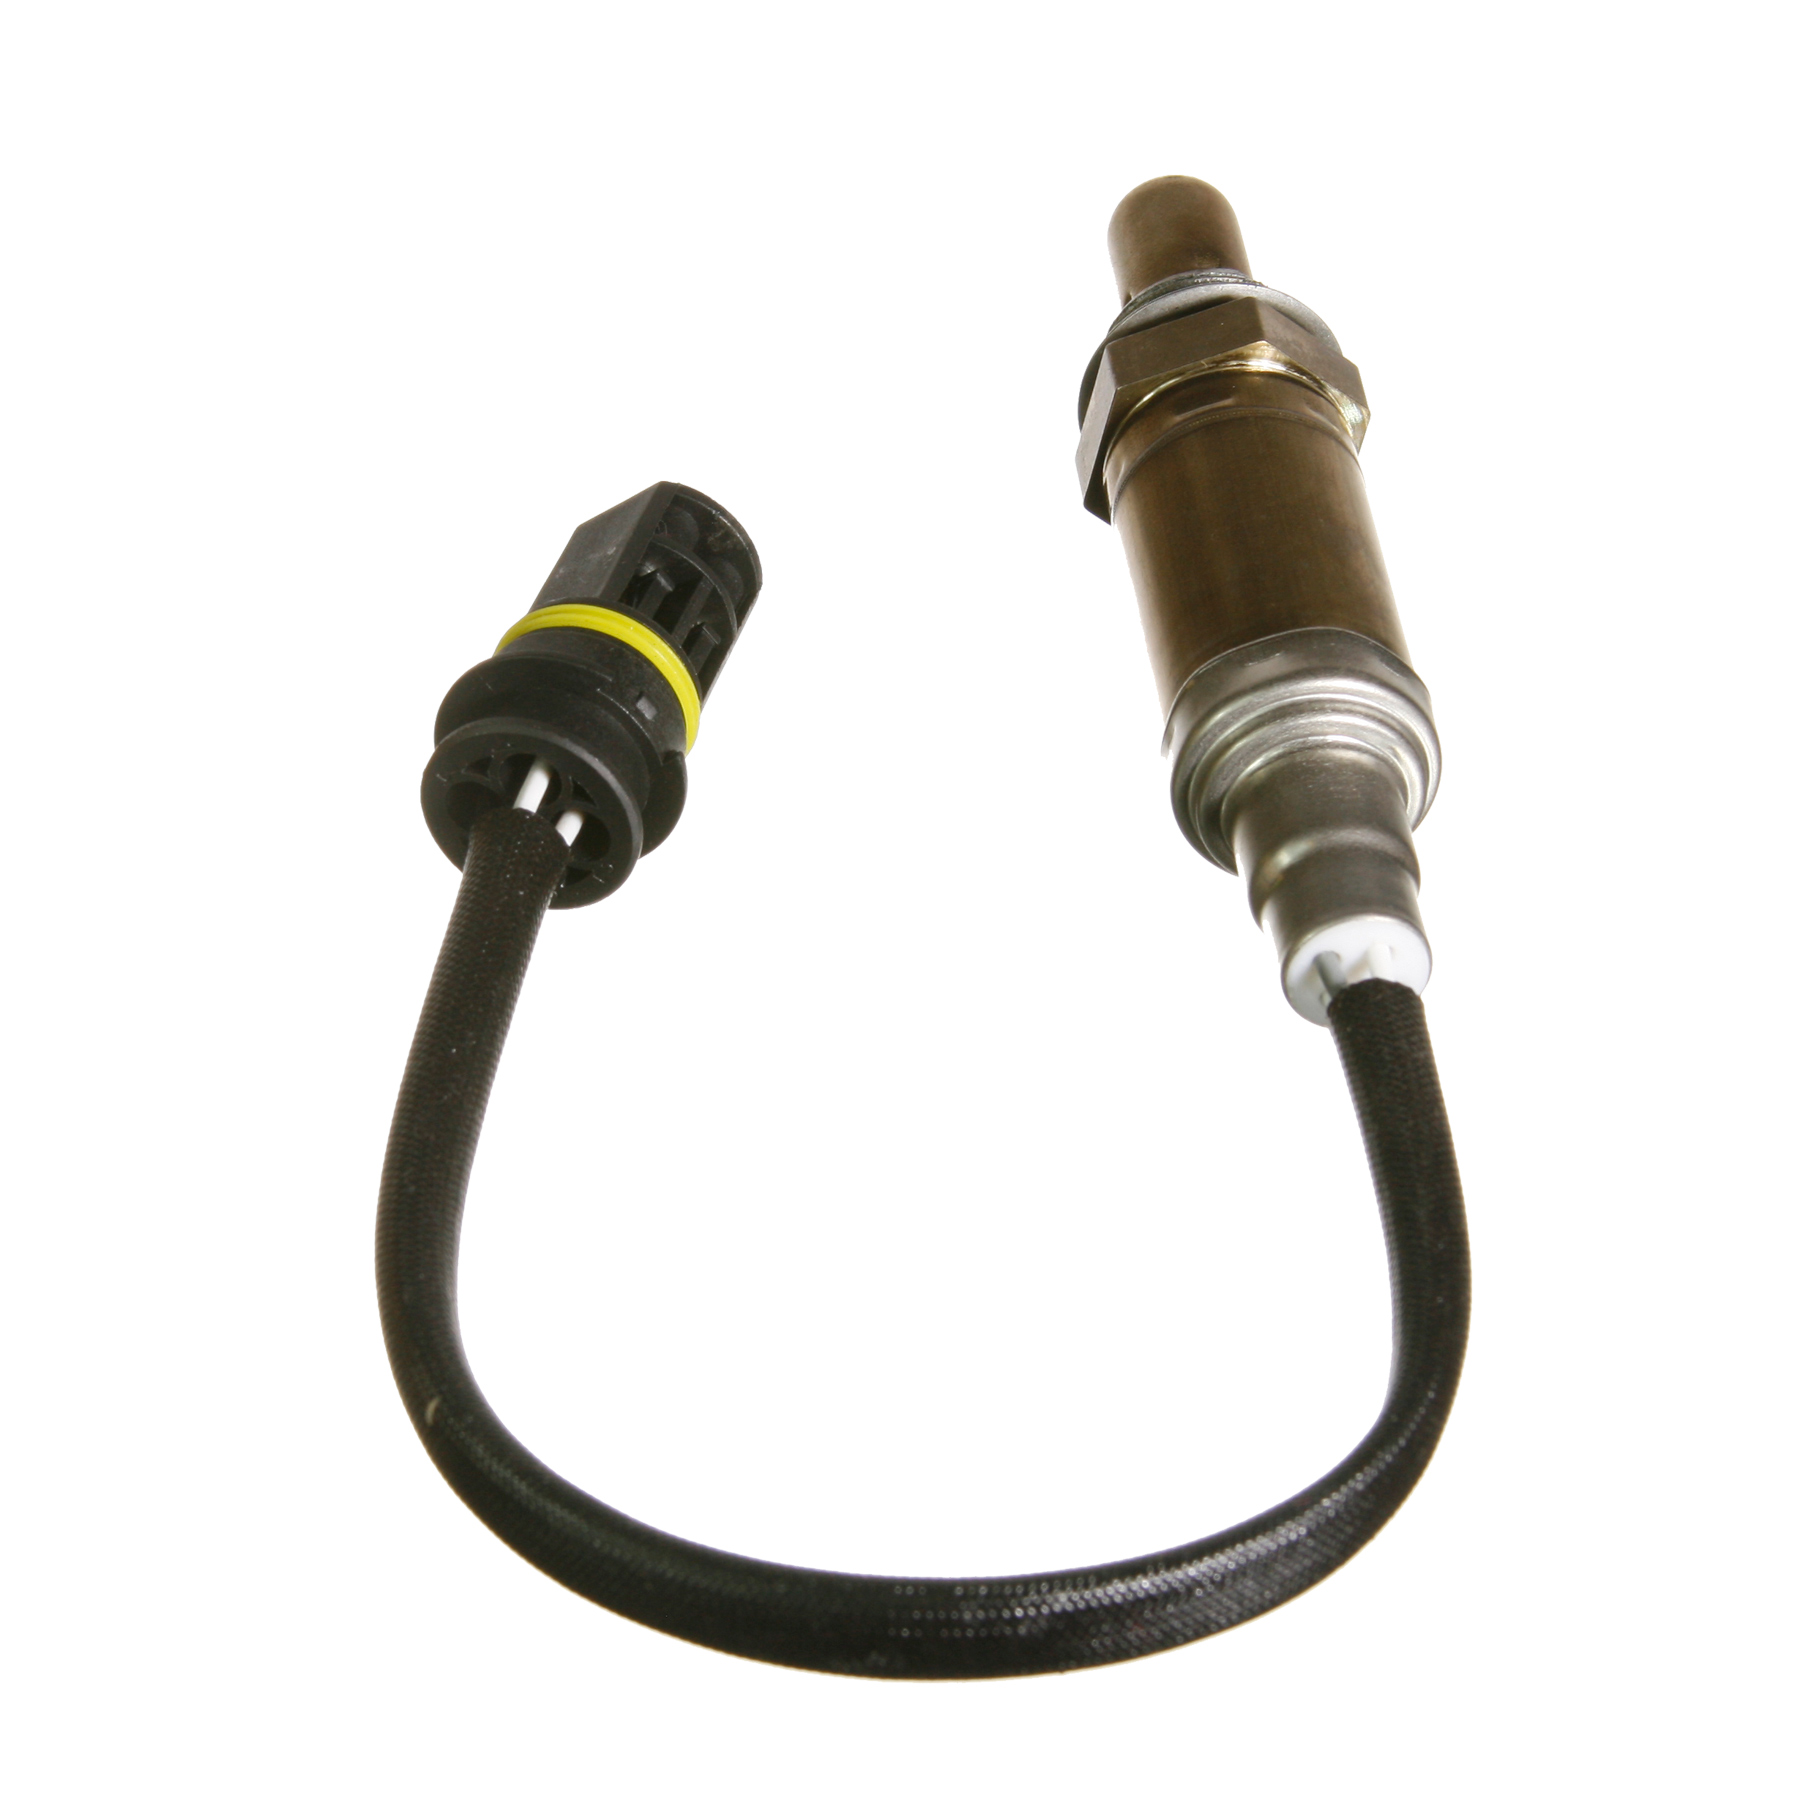 NEW FACTORY PACKAGED DENSO 234-4174 OXYGEN SENSOR FOR MERCEDES CL500 CL600 AMG